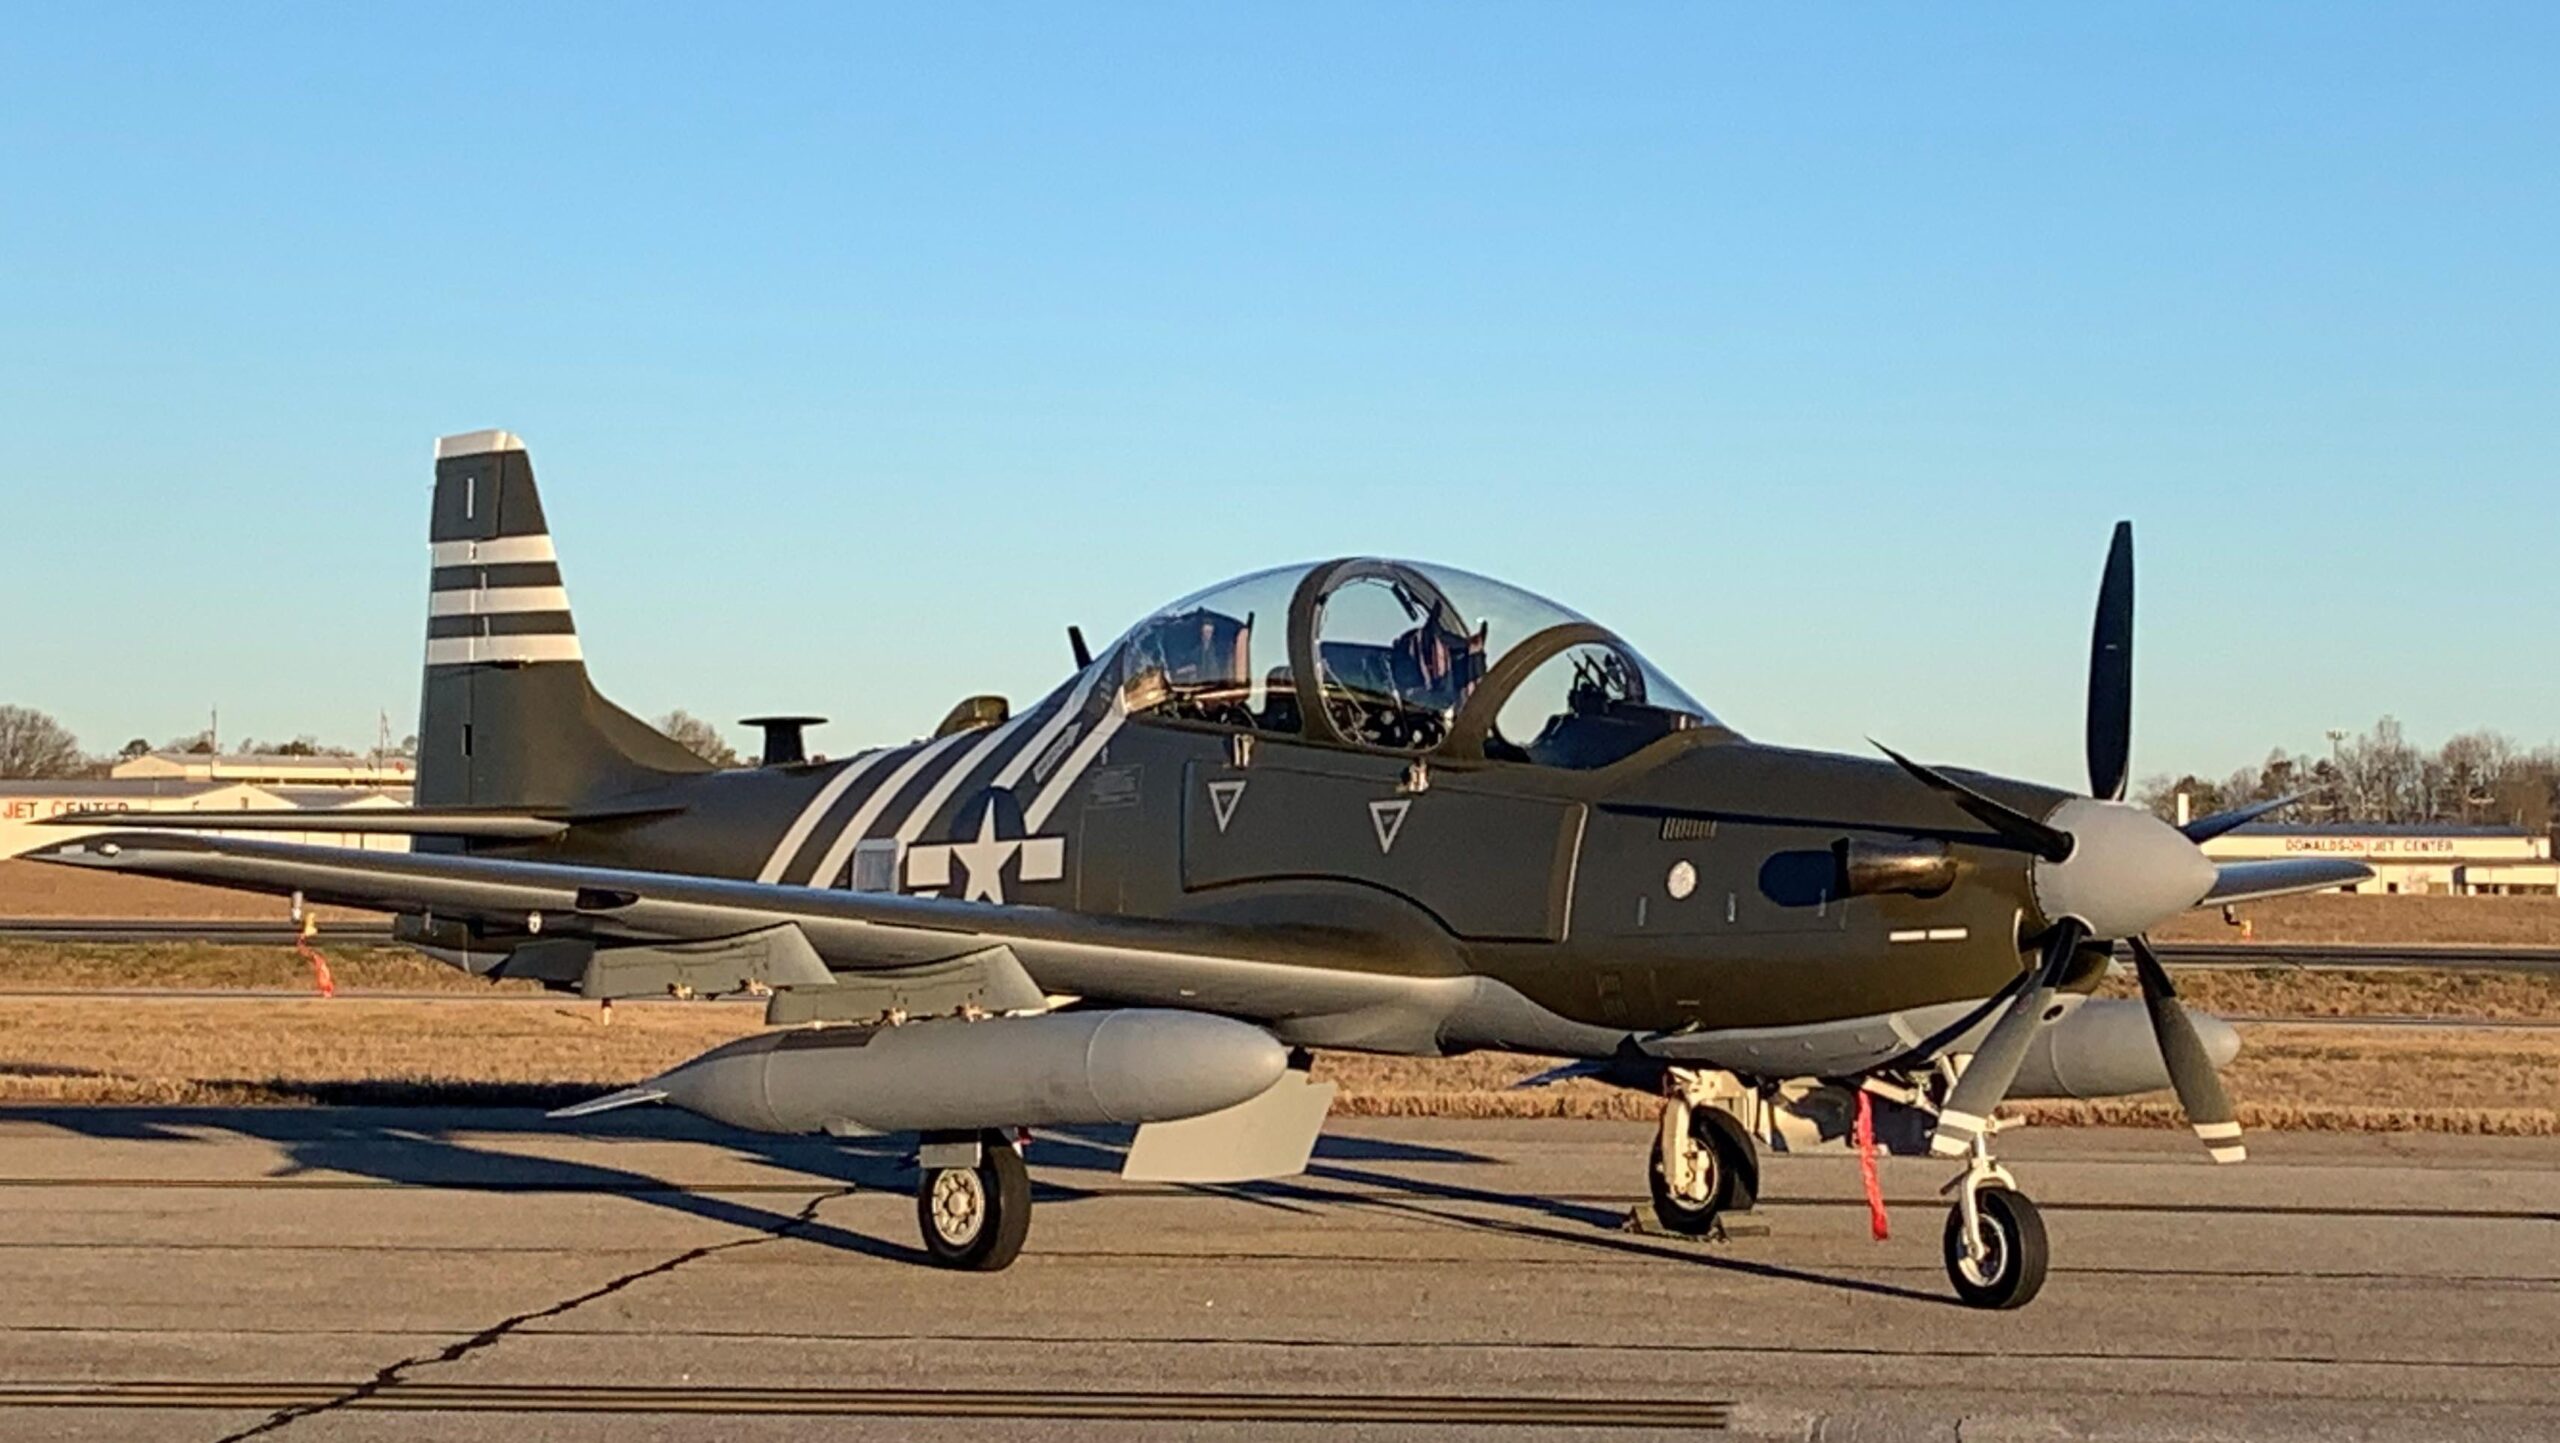 This A-29C Super Tucano is painted in the colors of the P-51 Mustang and P-47 Thunderbolt flown by Army Air Forces during World War II in China, Burma, and India.